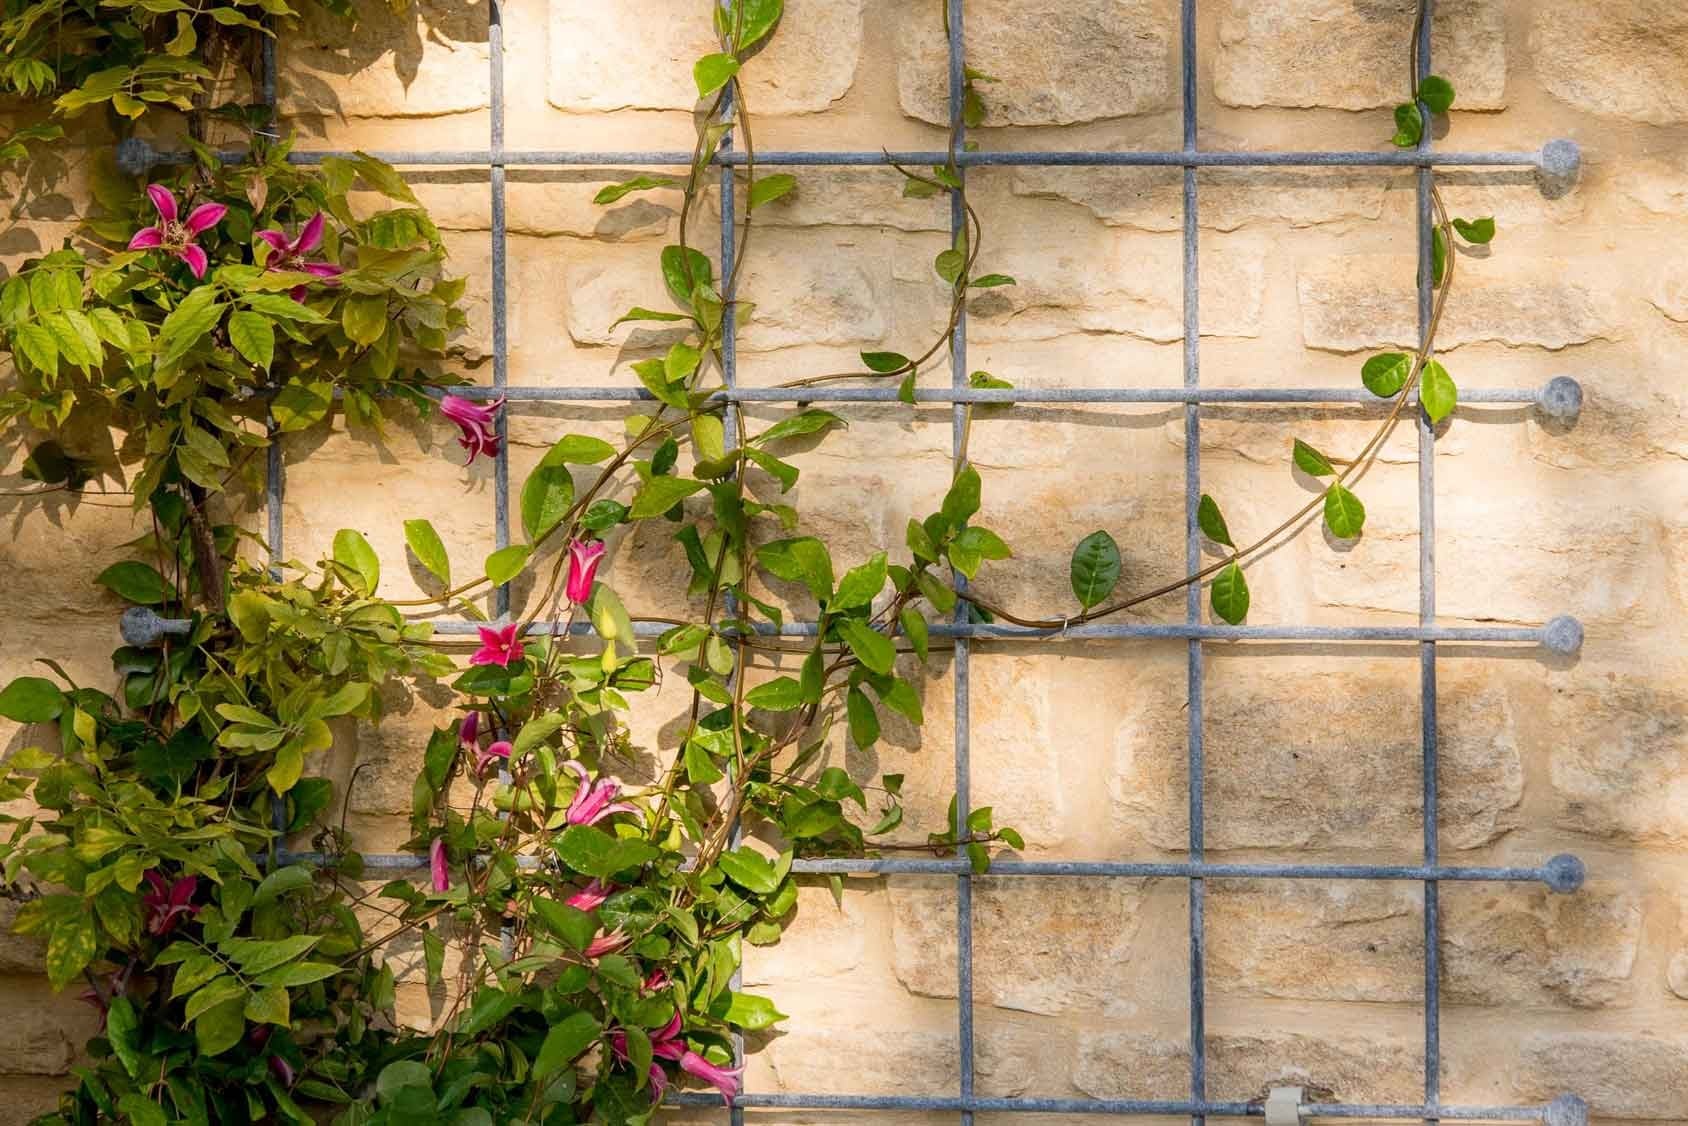 Southwold Decorative Wall Trellis Panels from Harrod Horticultural